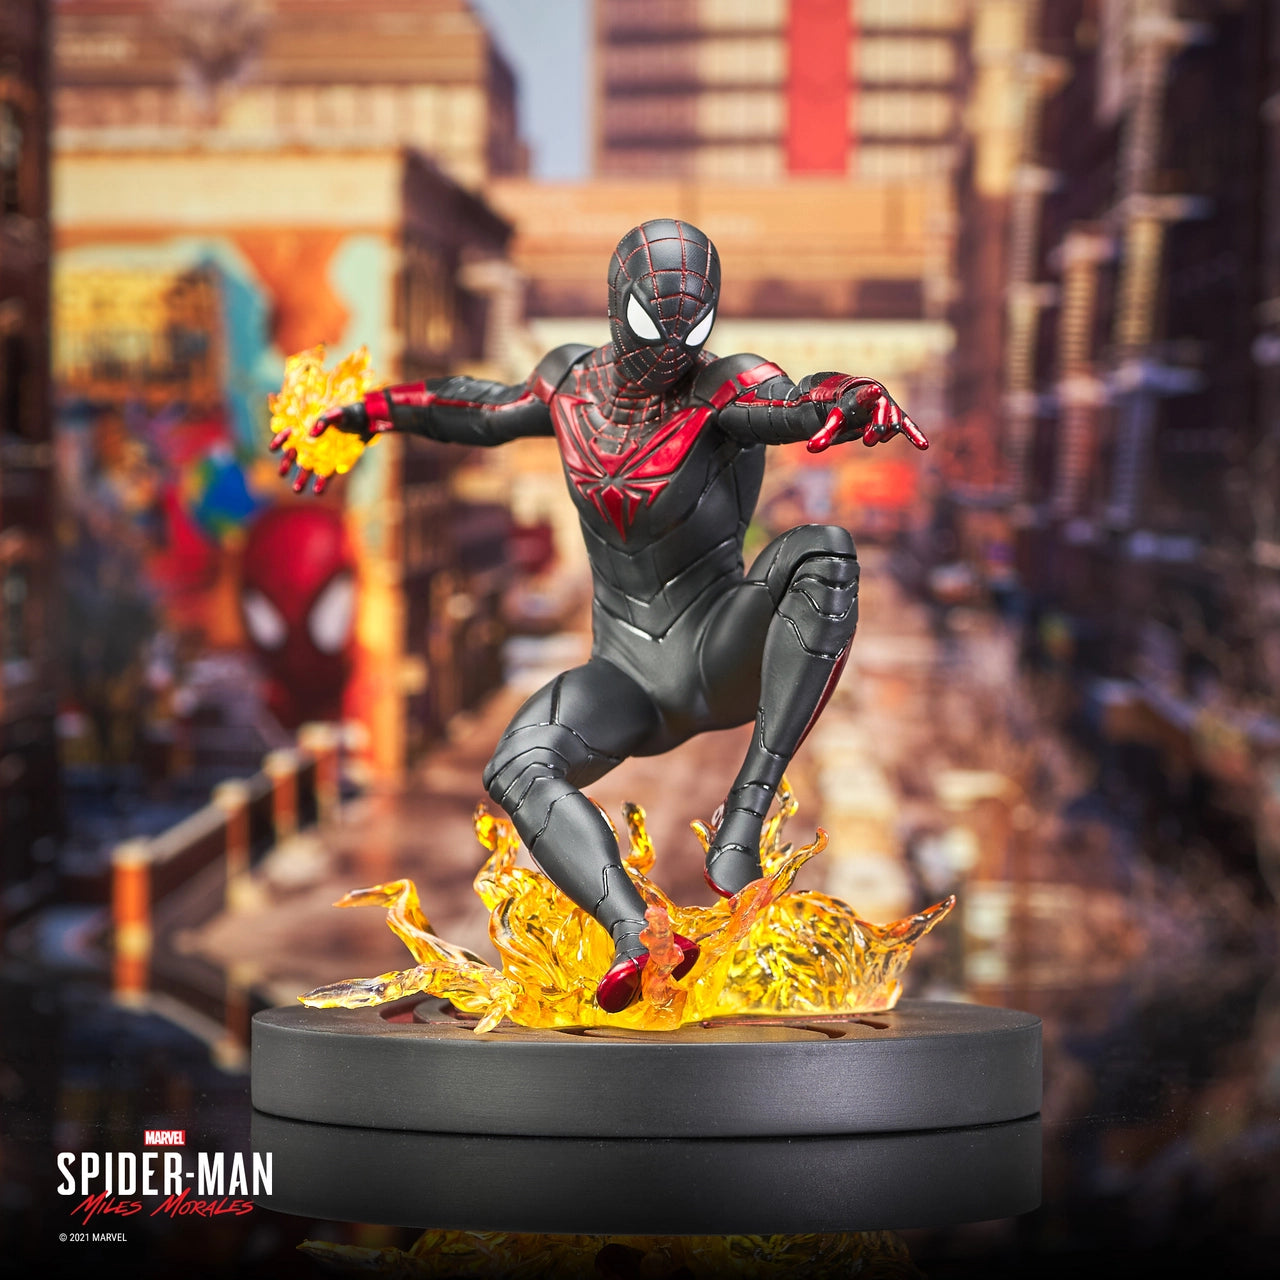 https://cdn.shopify.com/s/files/1/0409/4971/1001/products/spider-2-man-miles-morales-marvel-gallery-statue-1_1445x.webp?v=1650665086